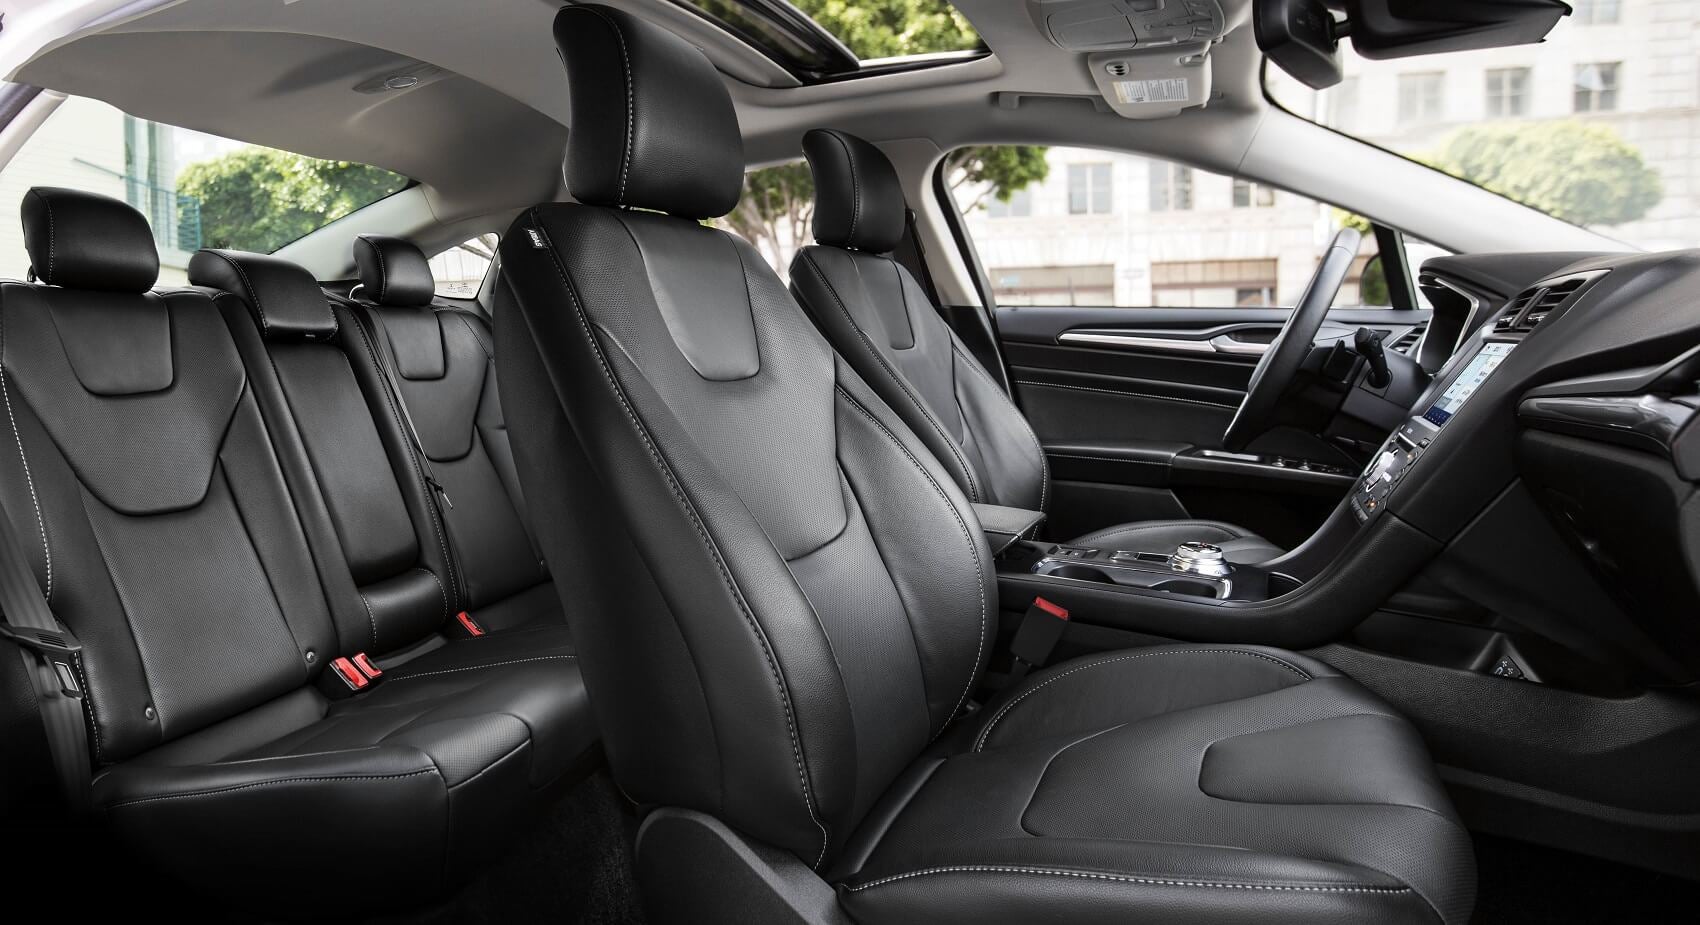 2020 Ford Fusion Interior Features 